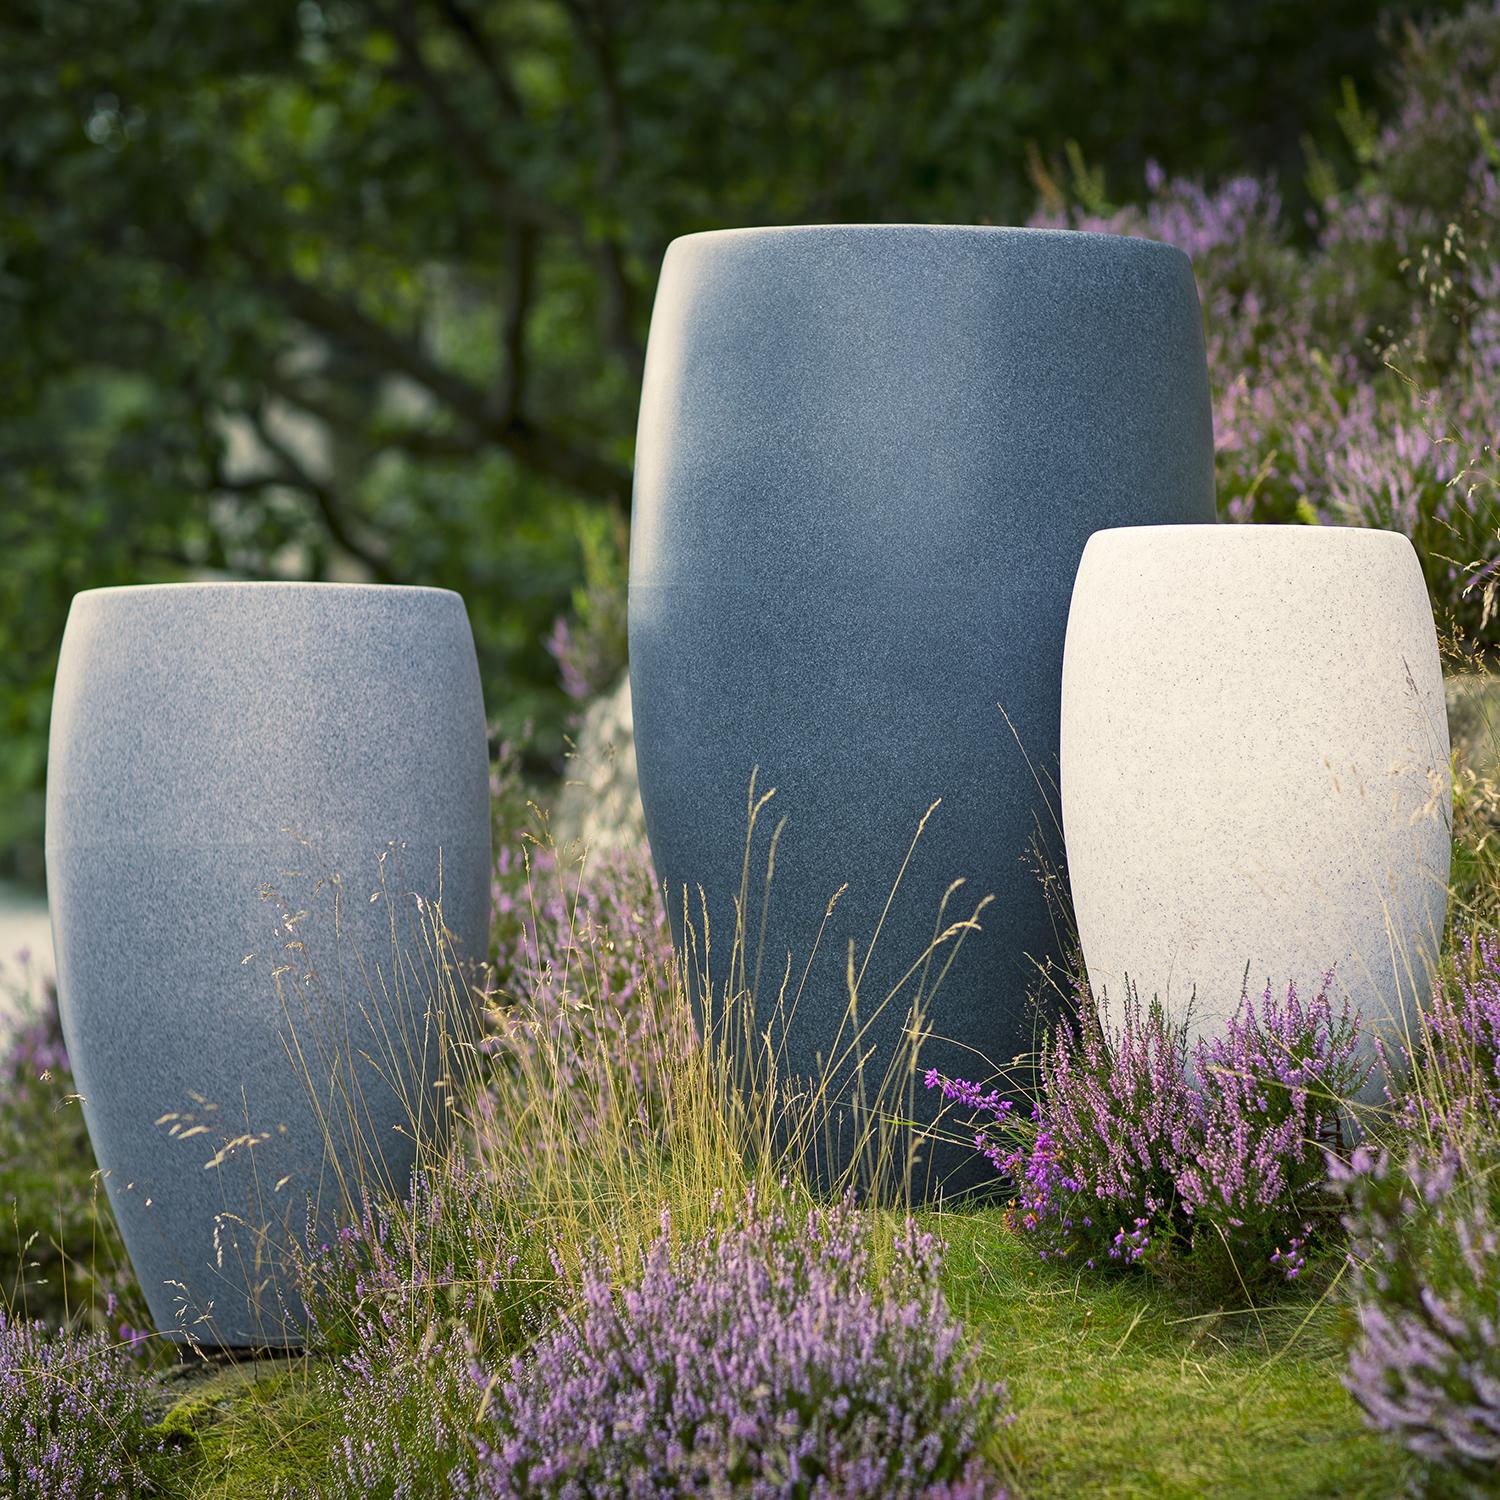 group of 3 plastic garden planters in high quality uk made contemporary design grey granite and marble effect finish